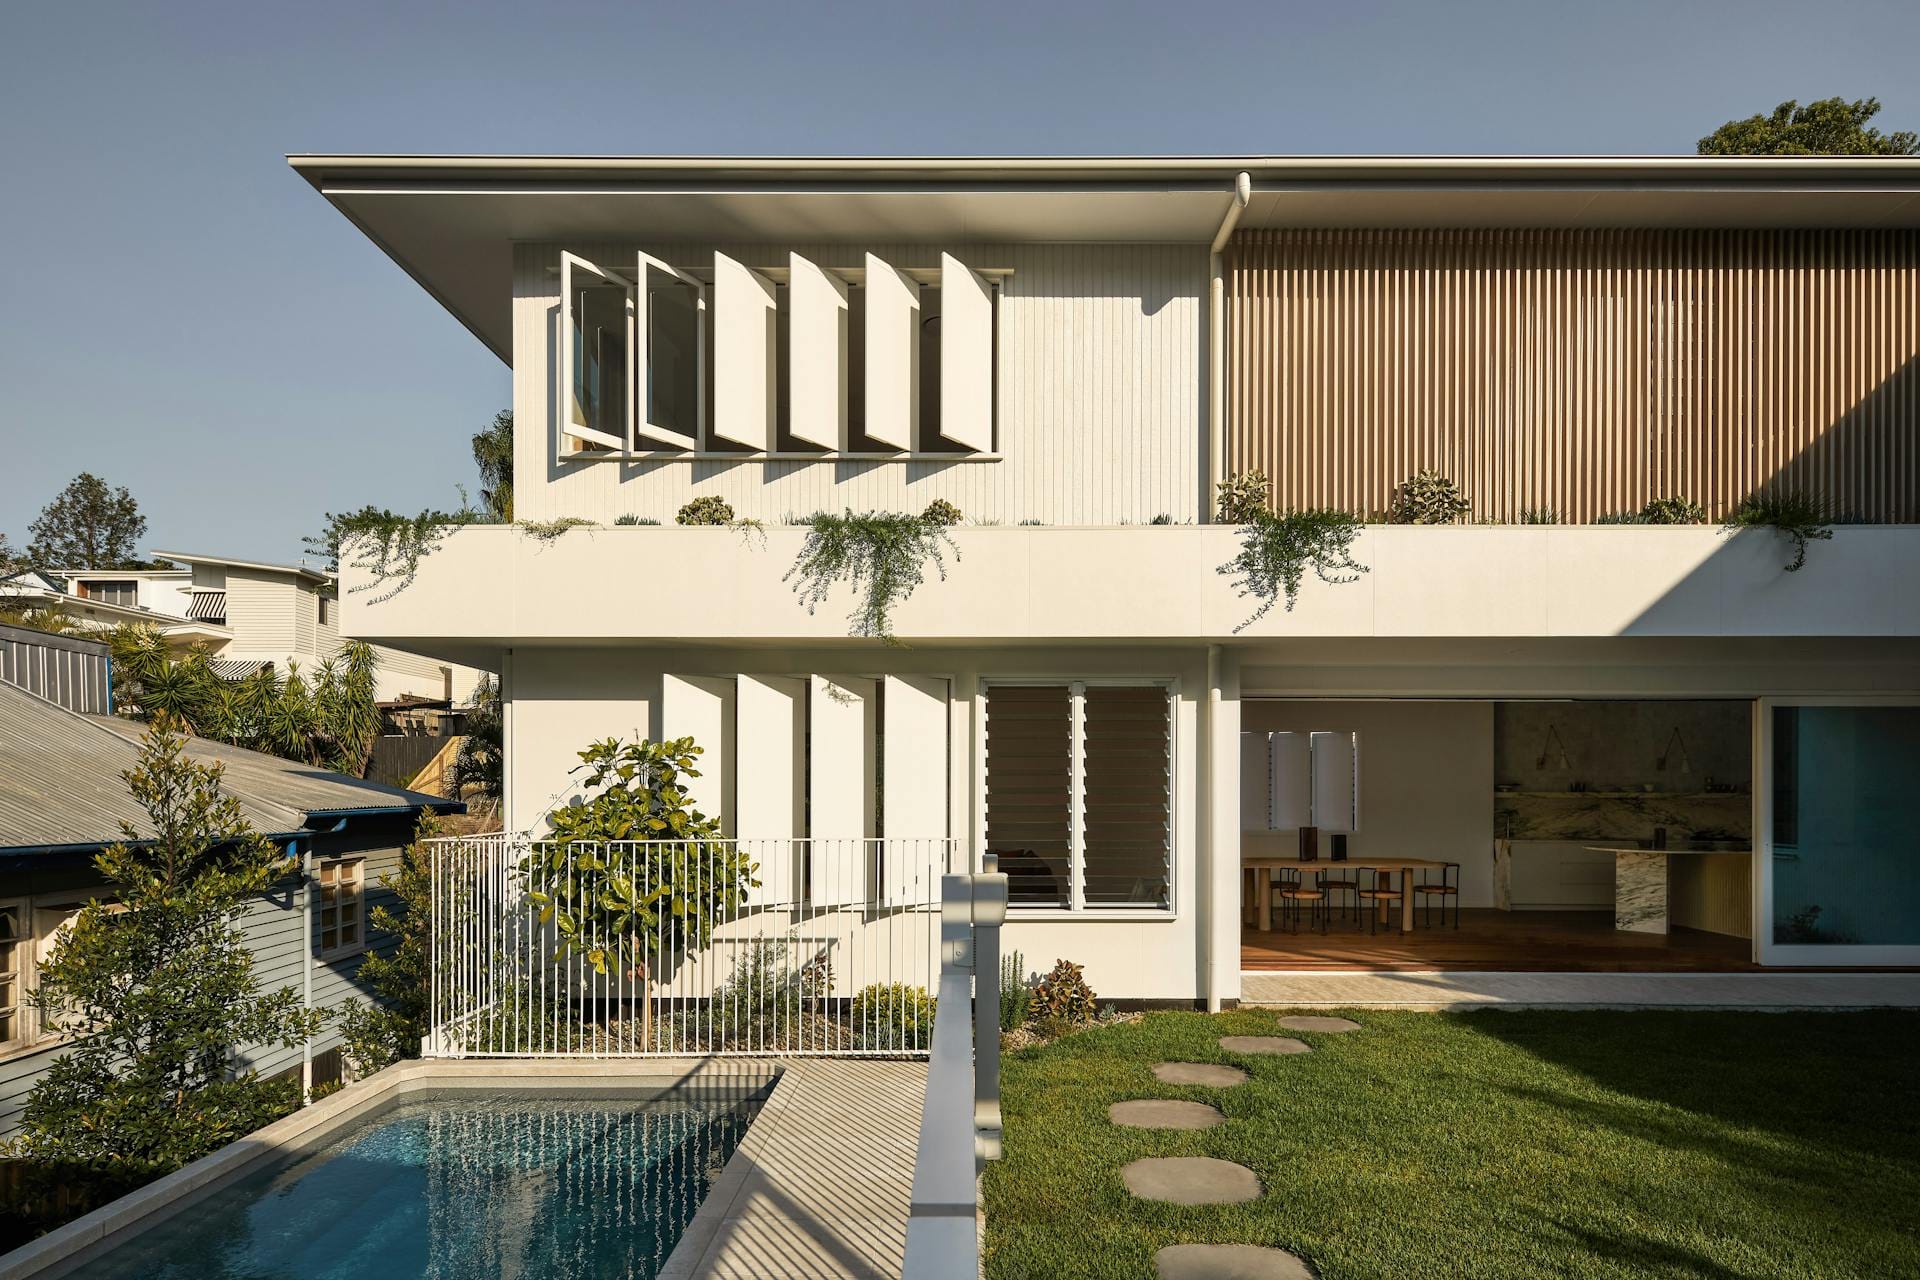 Hazlewood House by Favell Architects. Photography by Andy MacPherson. Rear facade of double storey white clad home with green backyard and pool.